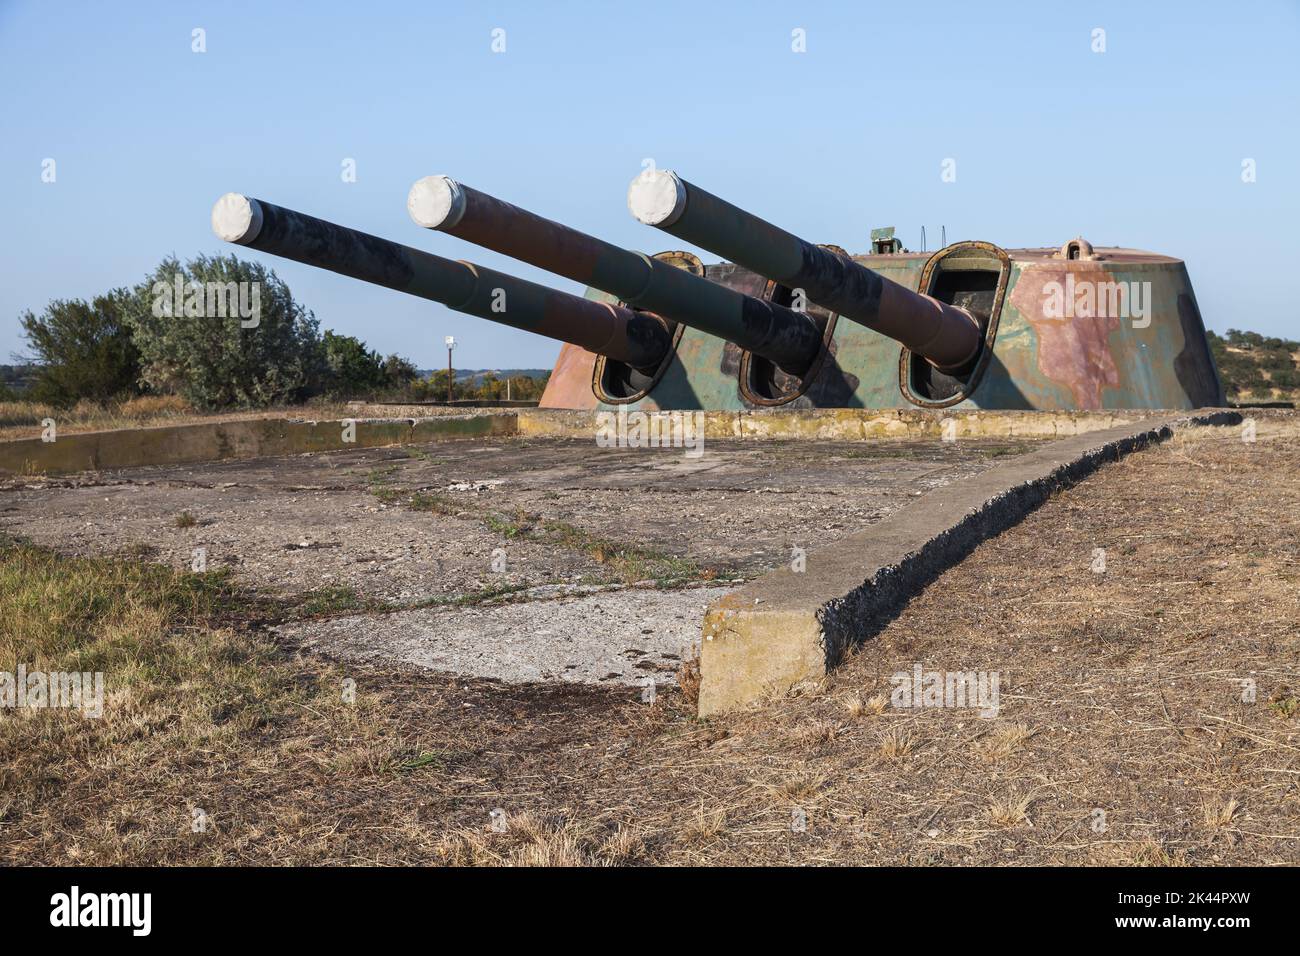 Triple gun of the armored battery 30, Soviet military unit which was important in the defense of Sevastopol 1941-1942 during WWII Stock Photo